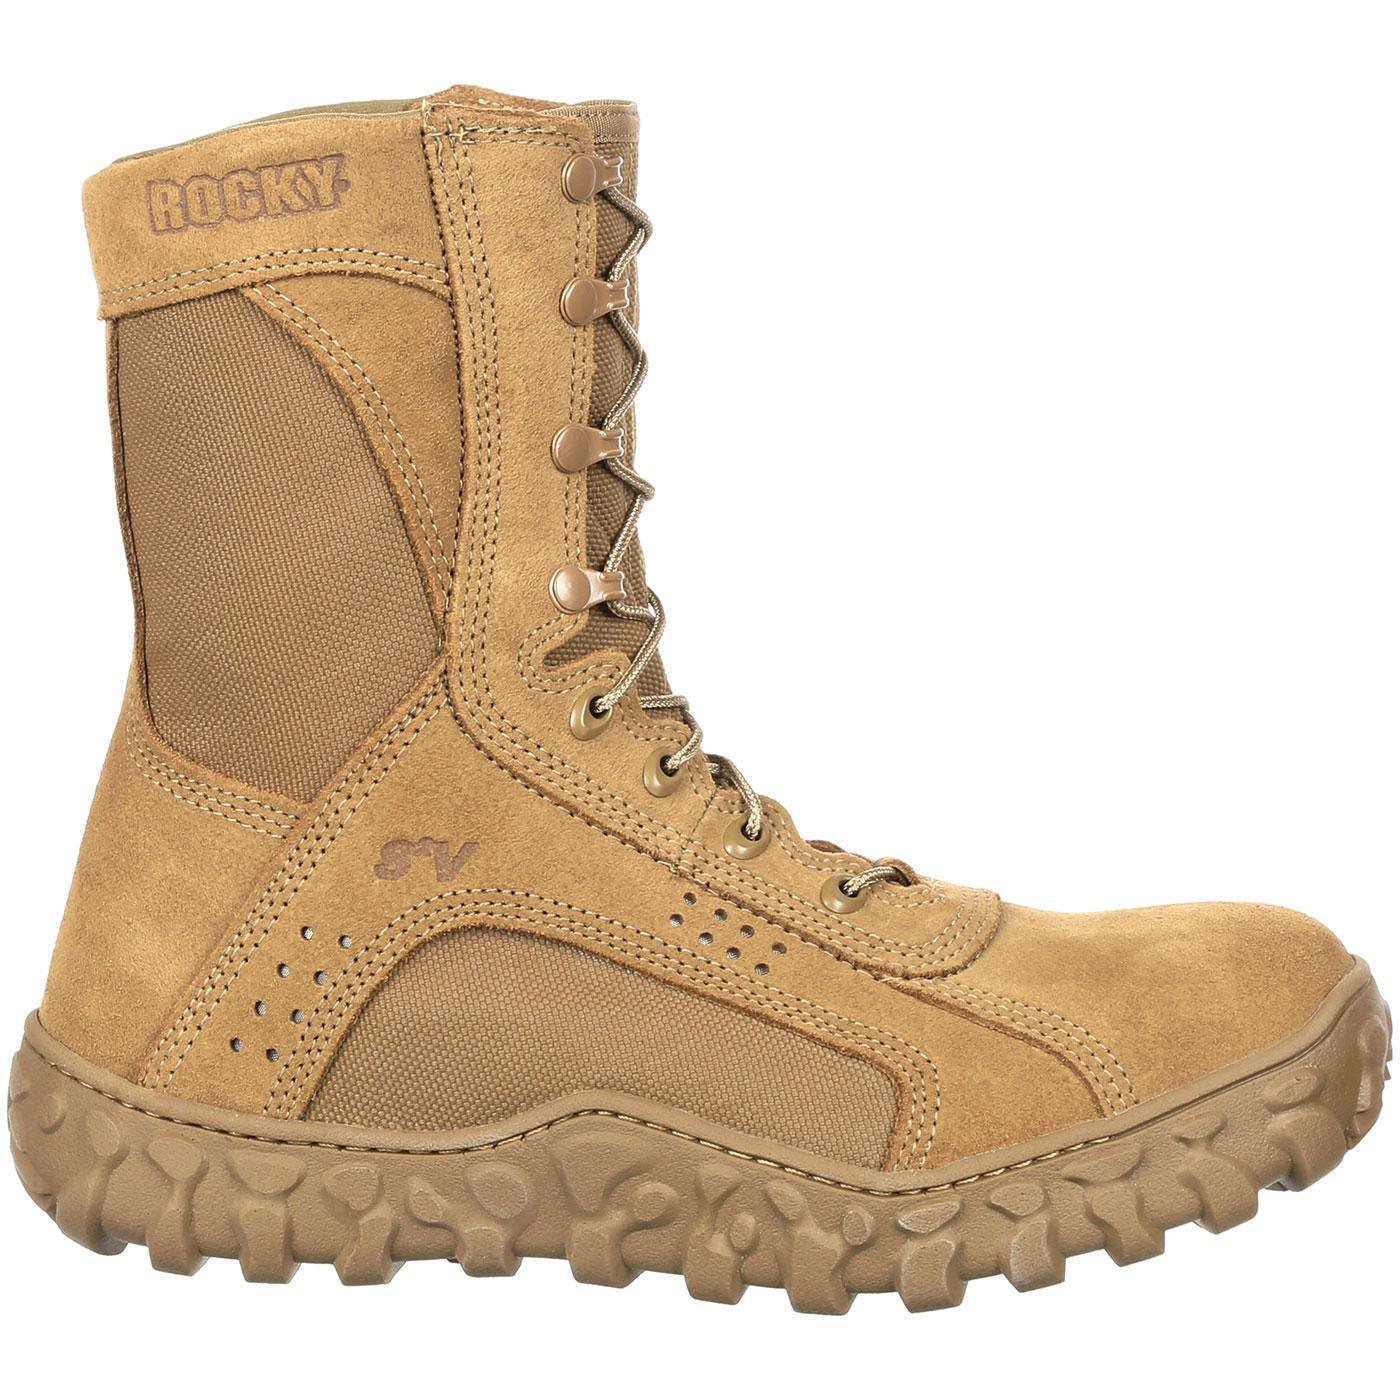 Rocky S2V Steel Toe Tactical Military Boot - Flyclothing LLC